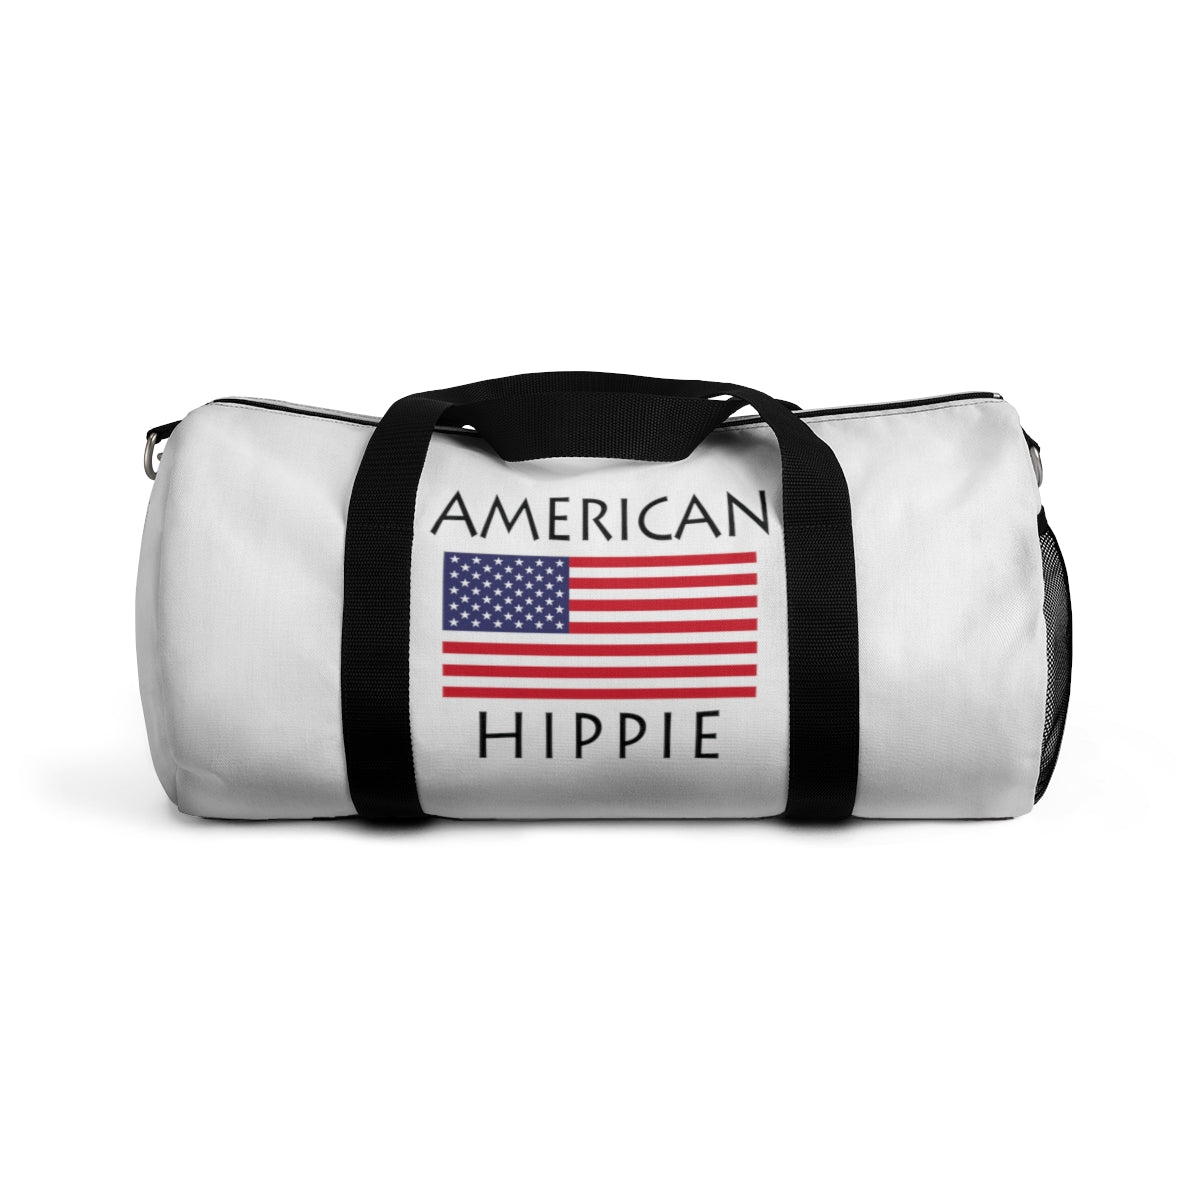 Stately Wear's American Flag Hippie duffel bag. We are a Katie Couric Shop partner. The perfect accessory as a beach bag, ski bag, travel bag & gym or yoga bag. Custom made one-at-a-time. 2 sizes to choose.